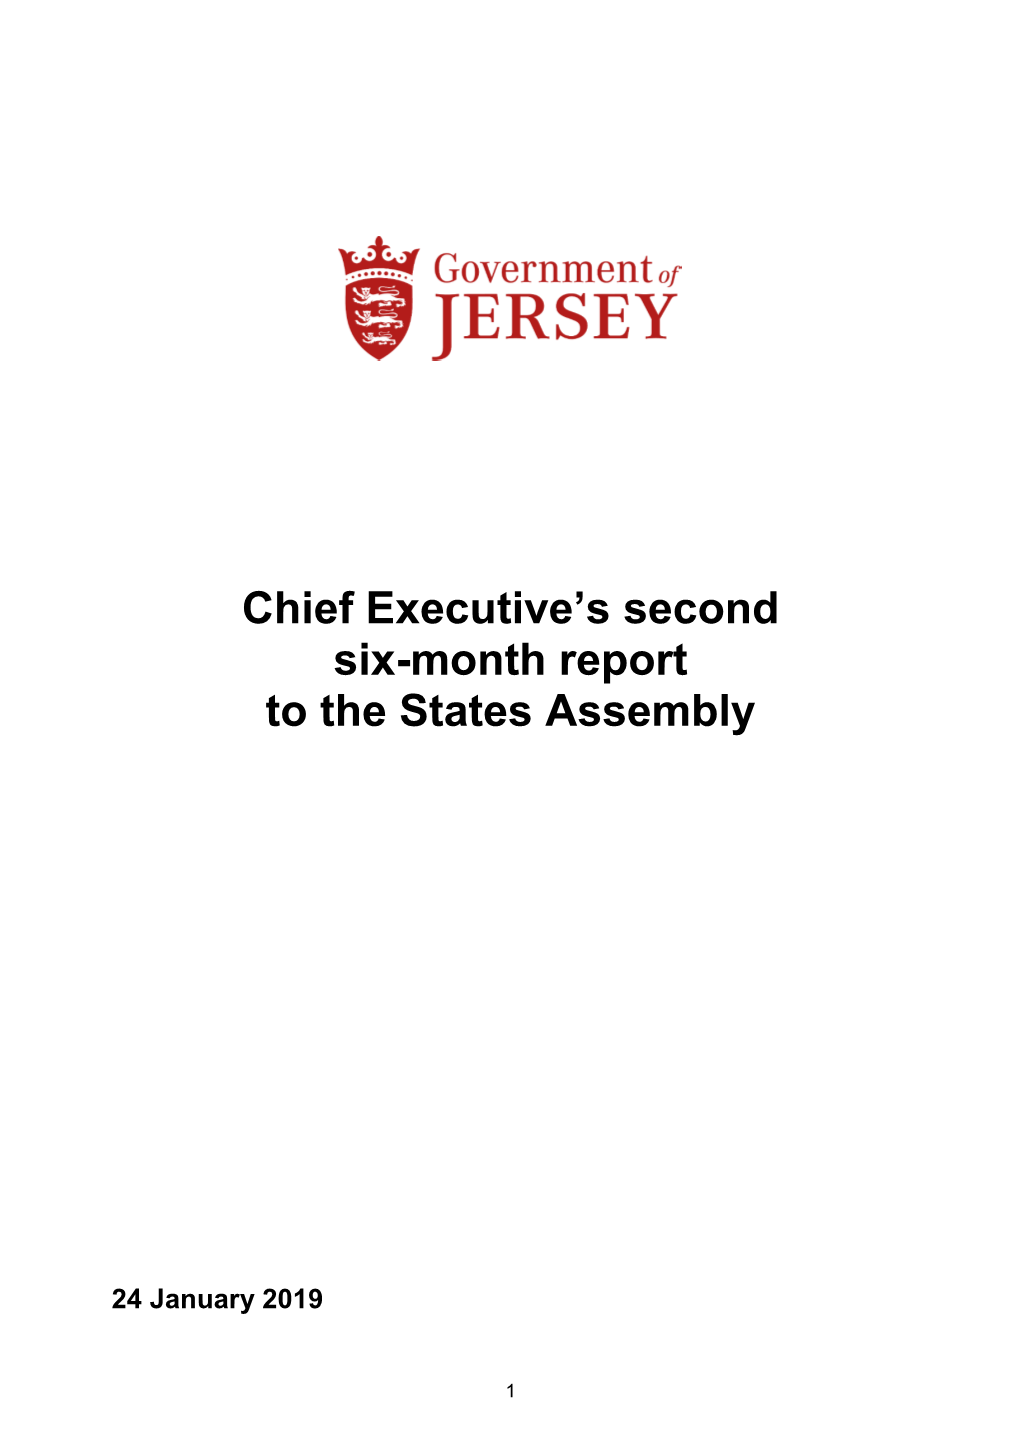 Chief Executive's Second Six-Month Report to the States Assembly